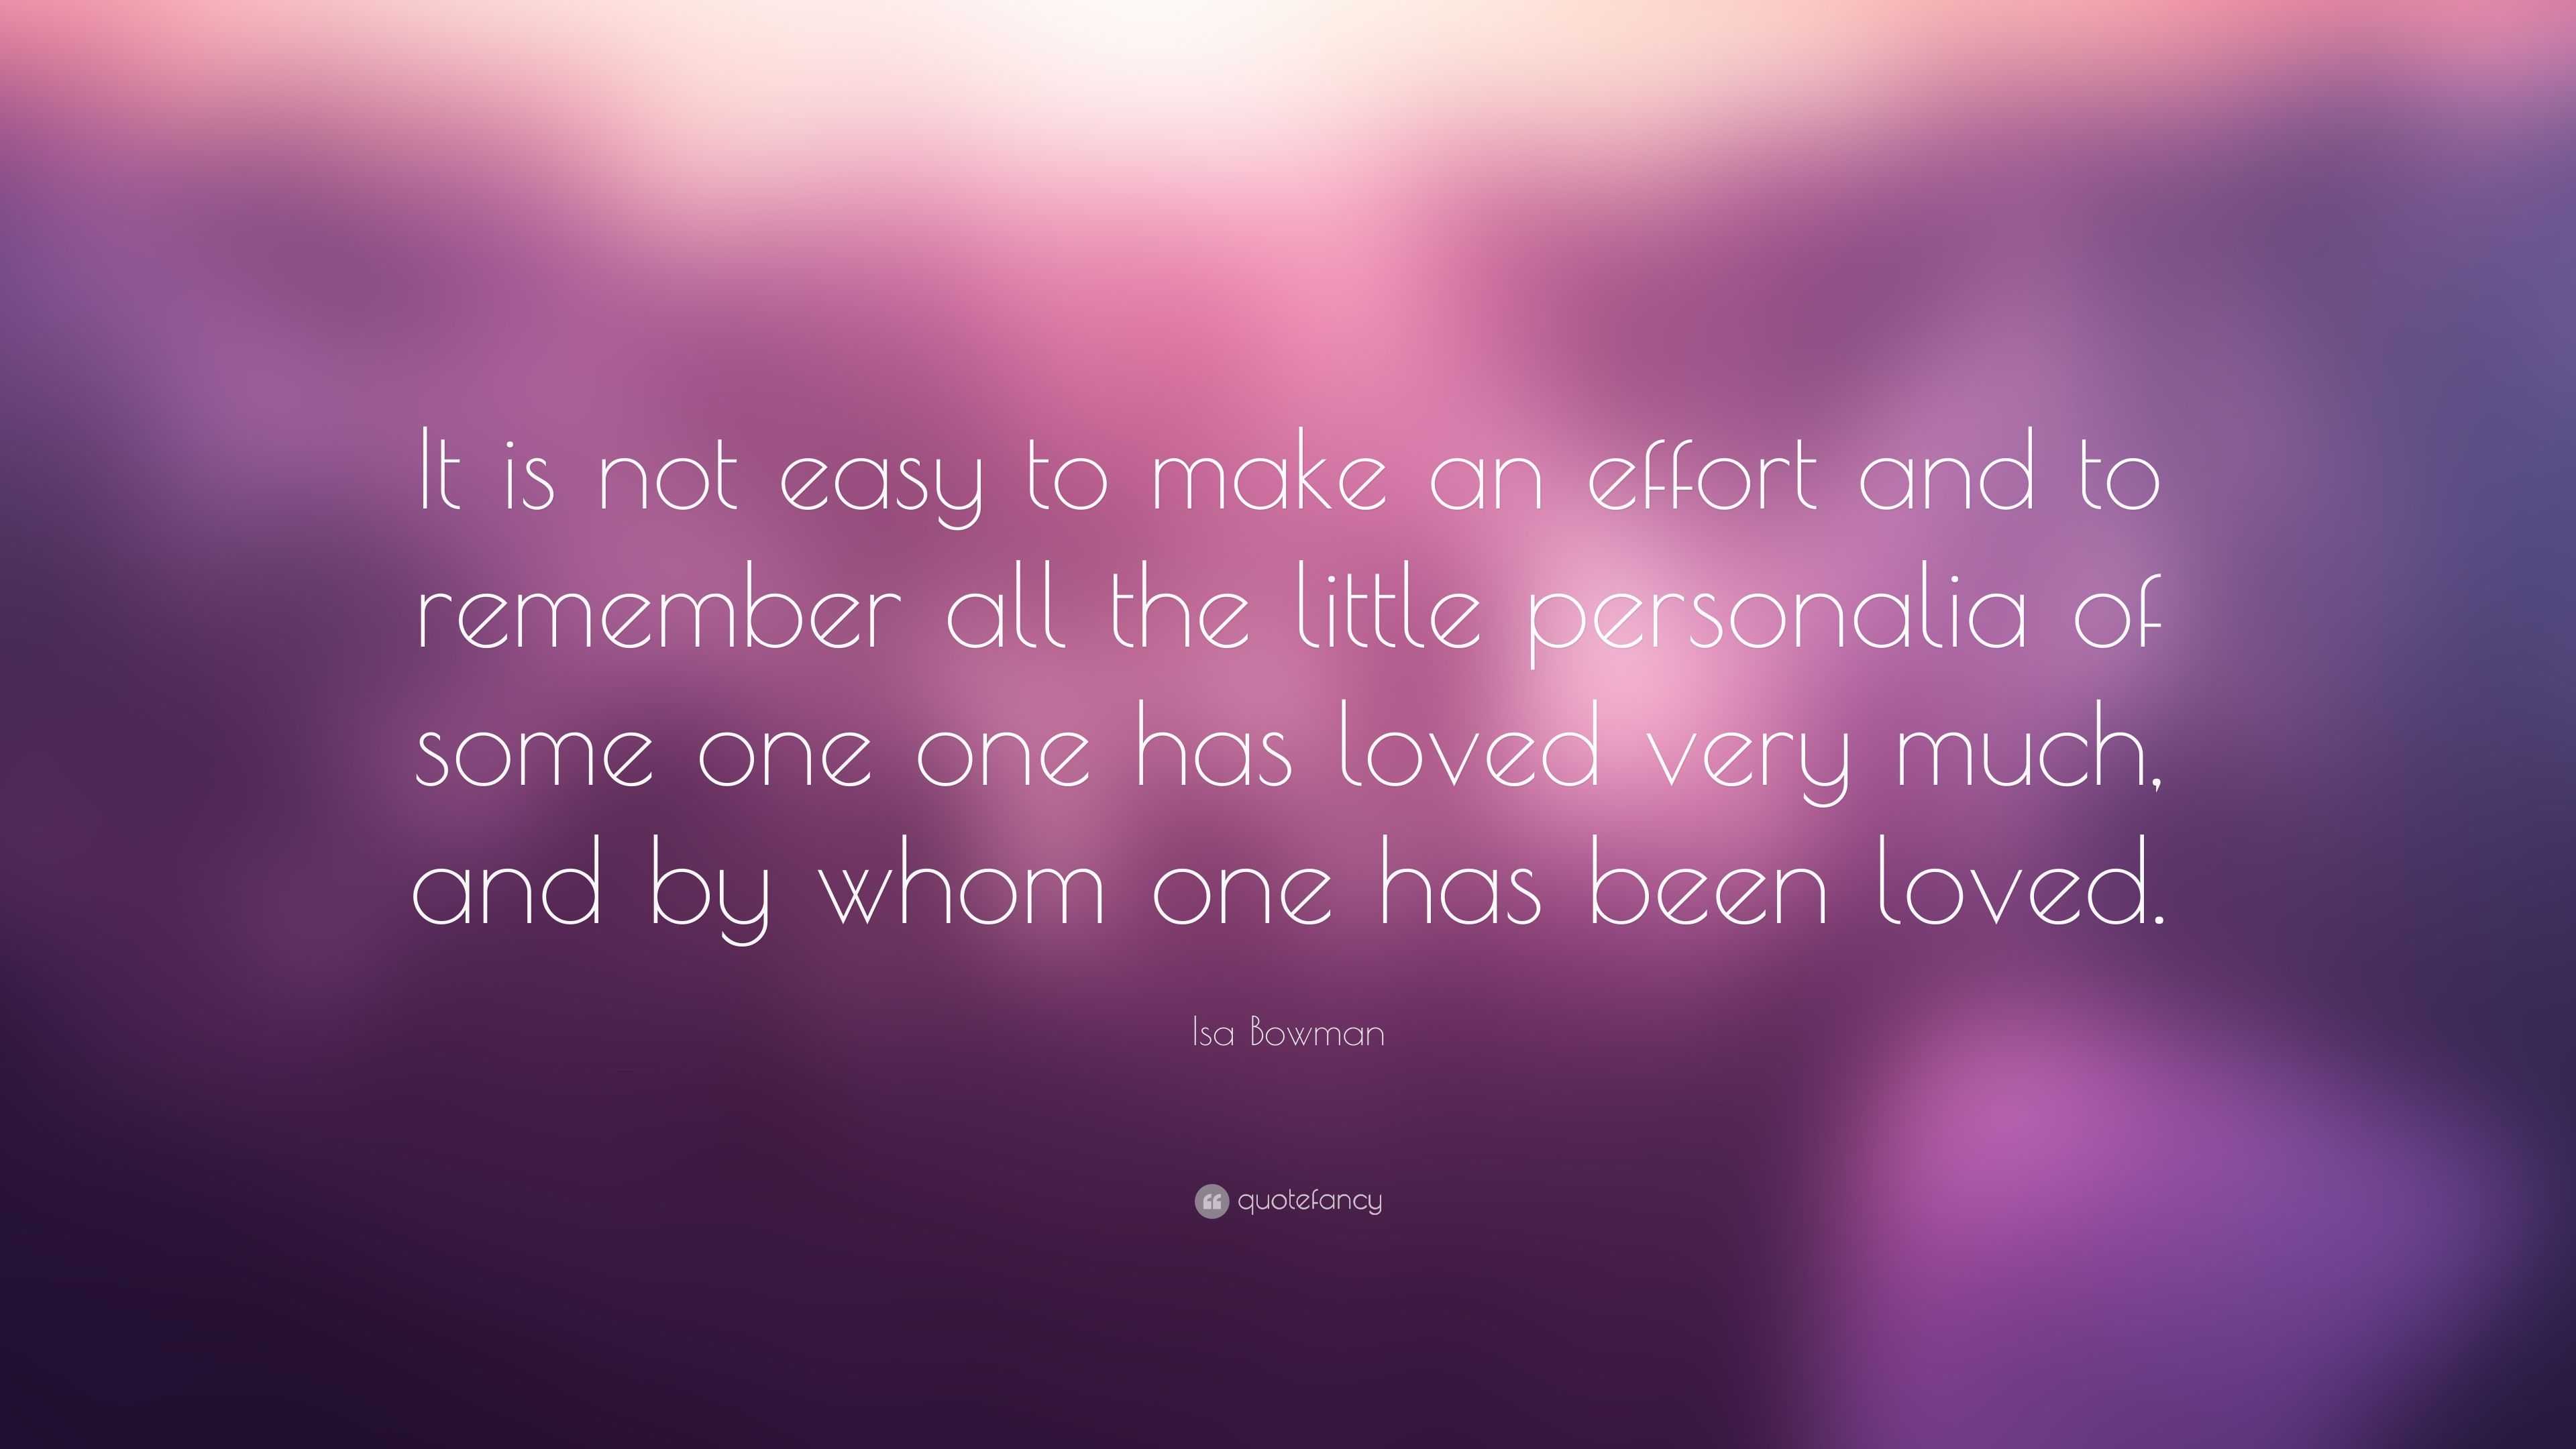 Isa Bowman Quote: “It is not easy to make an effort and to remember all ...